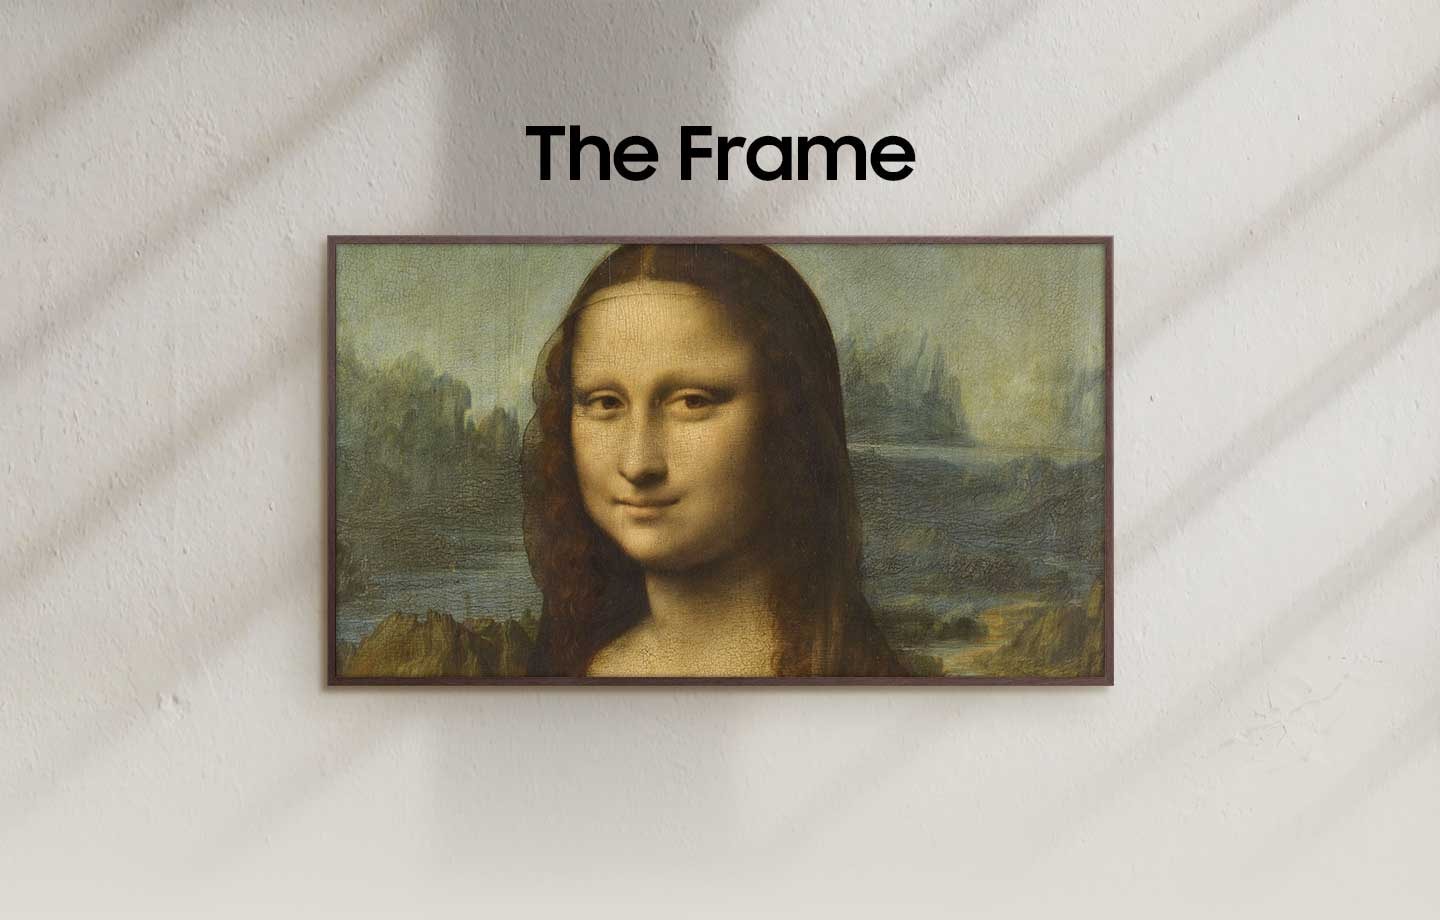 The Frame is displaying Mona Lisa on its screen.